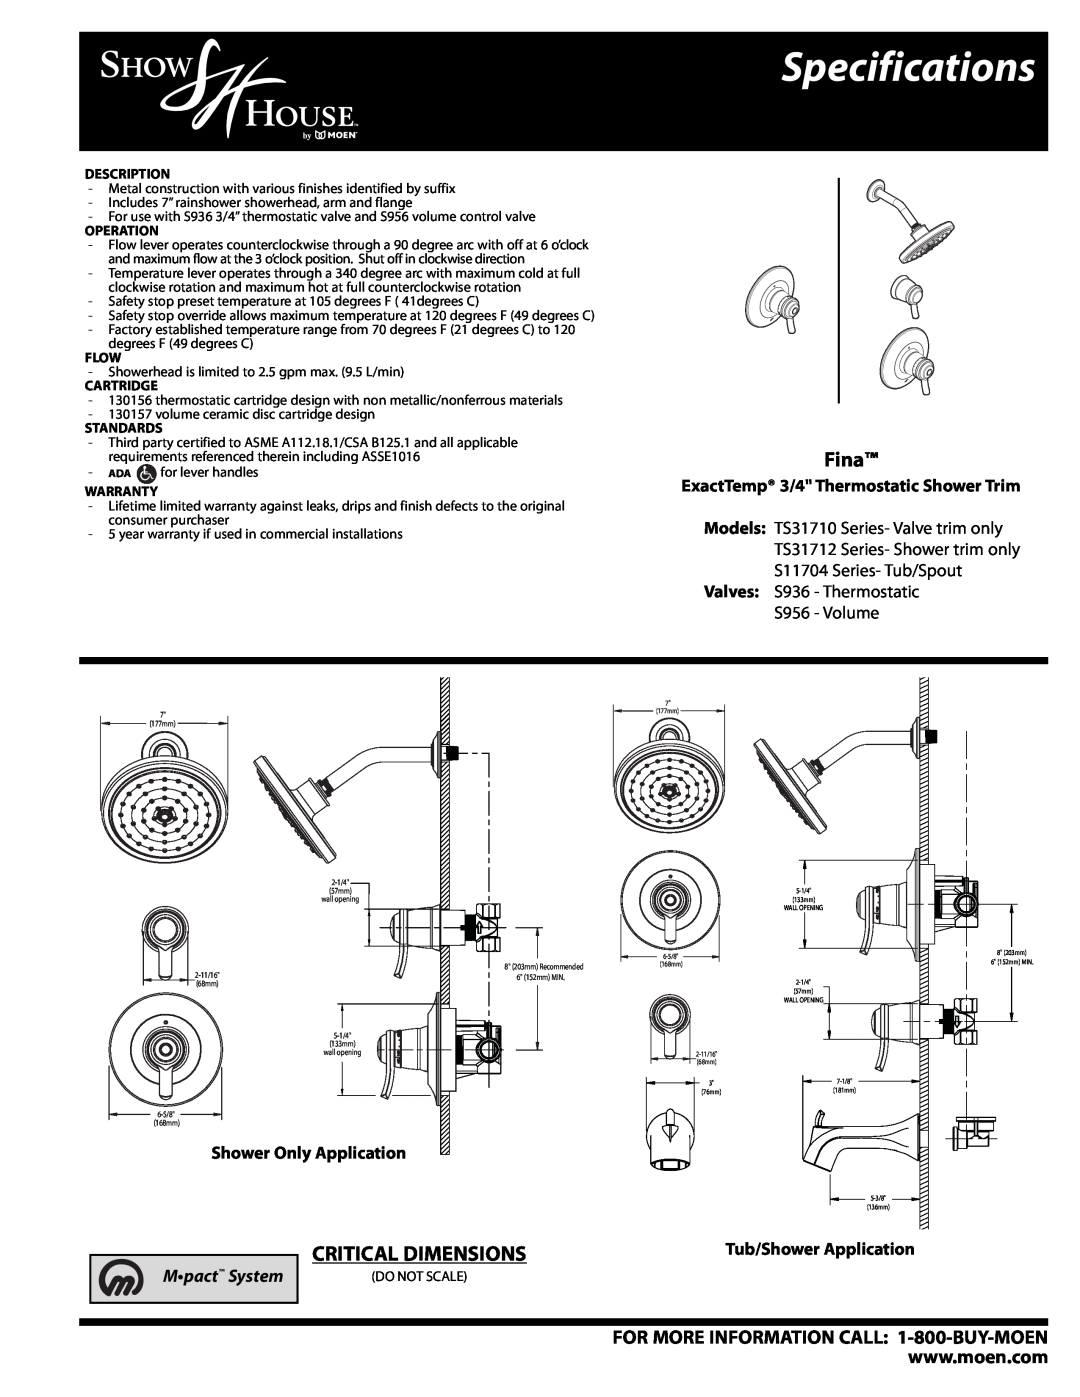 Moen S11704 specifications Specifications, Fina, Critical Dimensions, ExactTemp 3/4 Thermostatic Shower Trim, Mpact System 